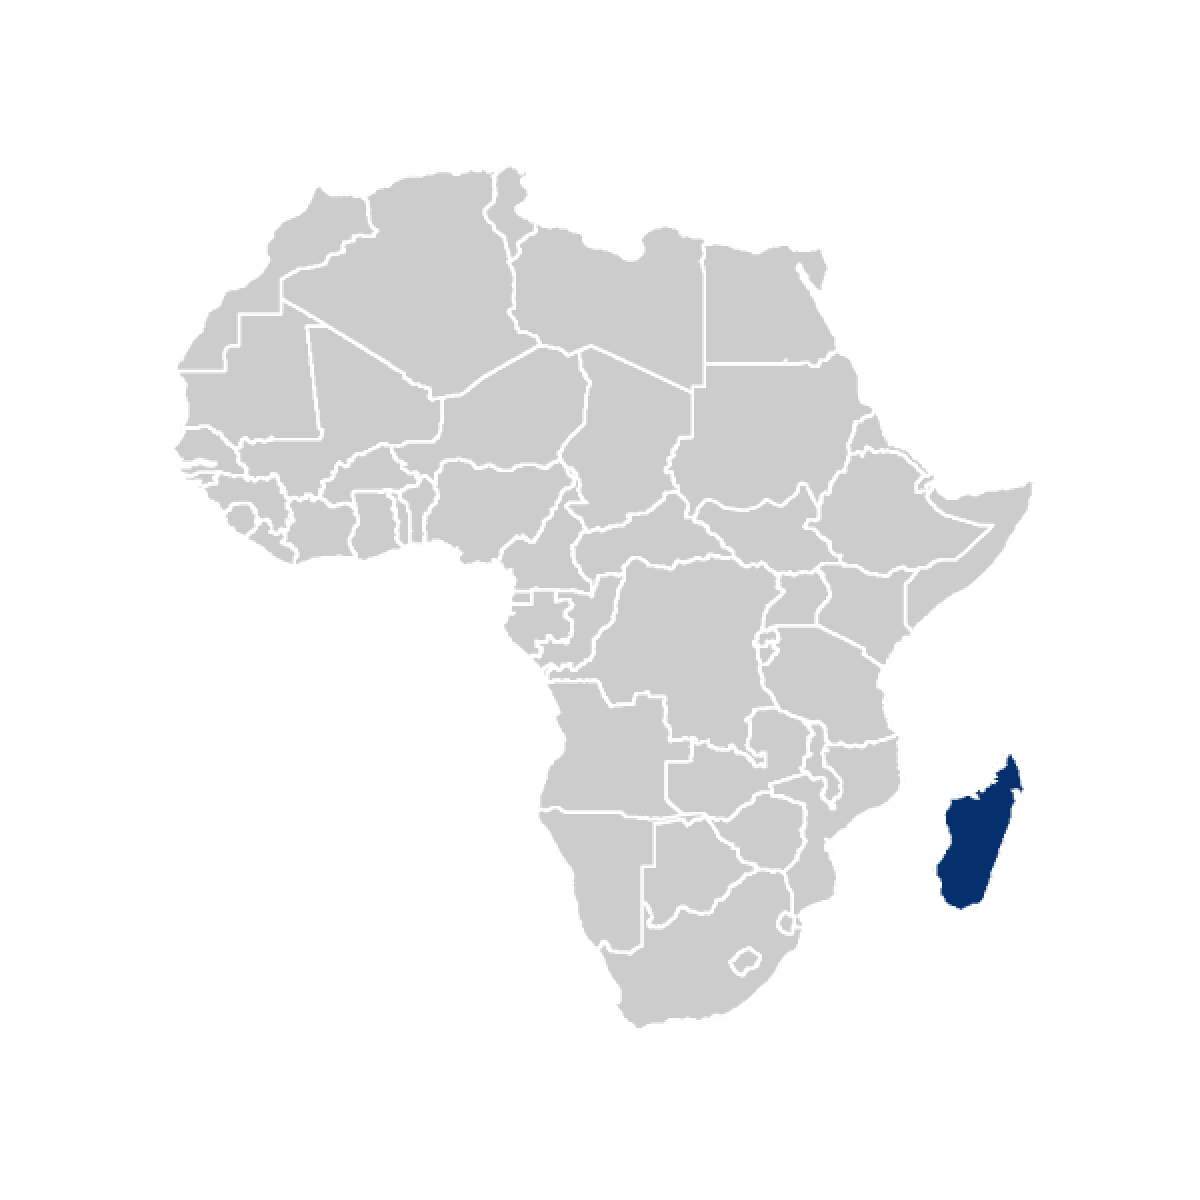 Madagascar highlighted in map of Africa